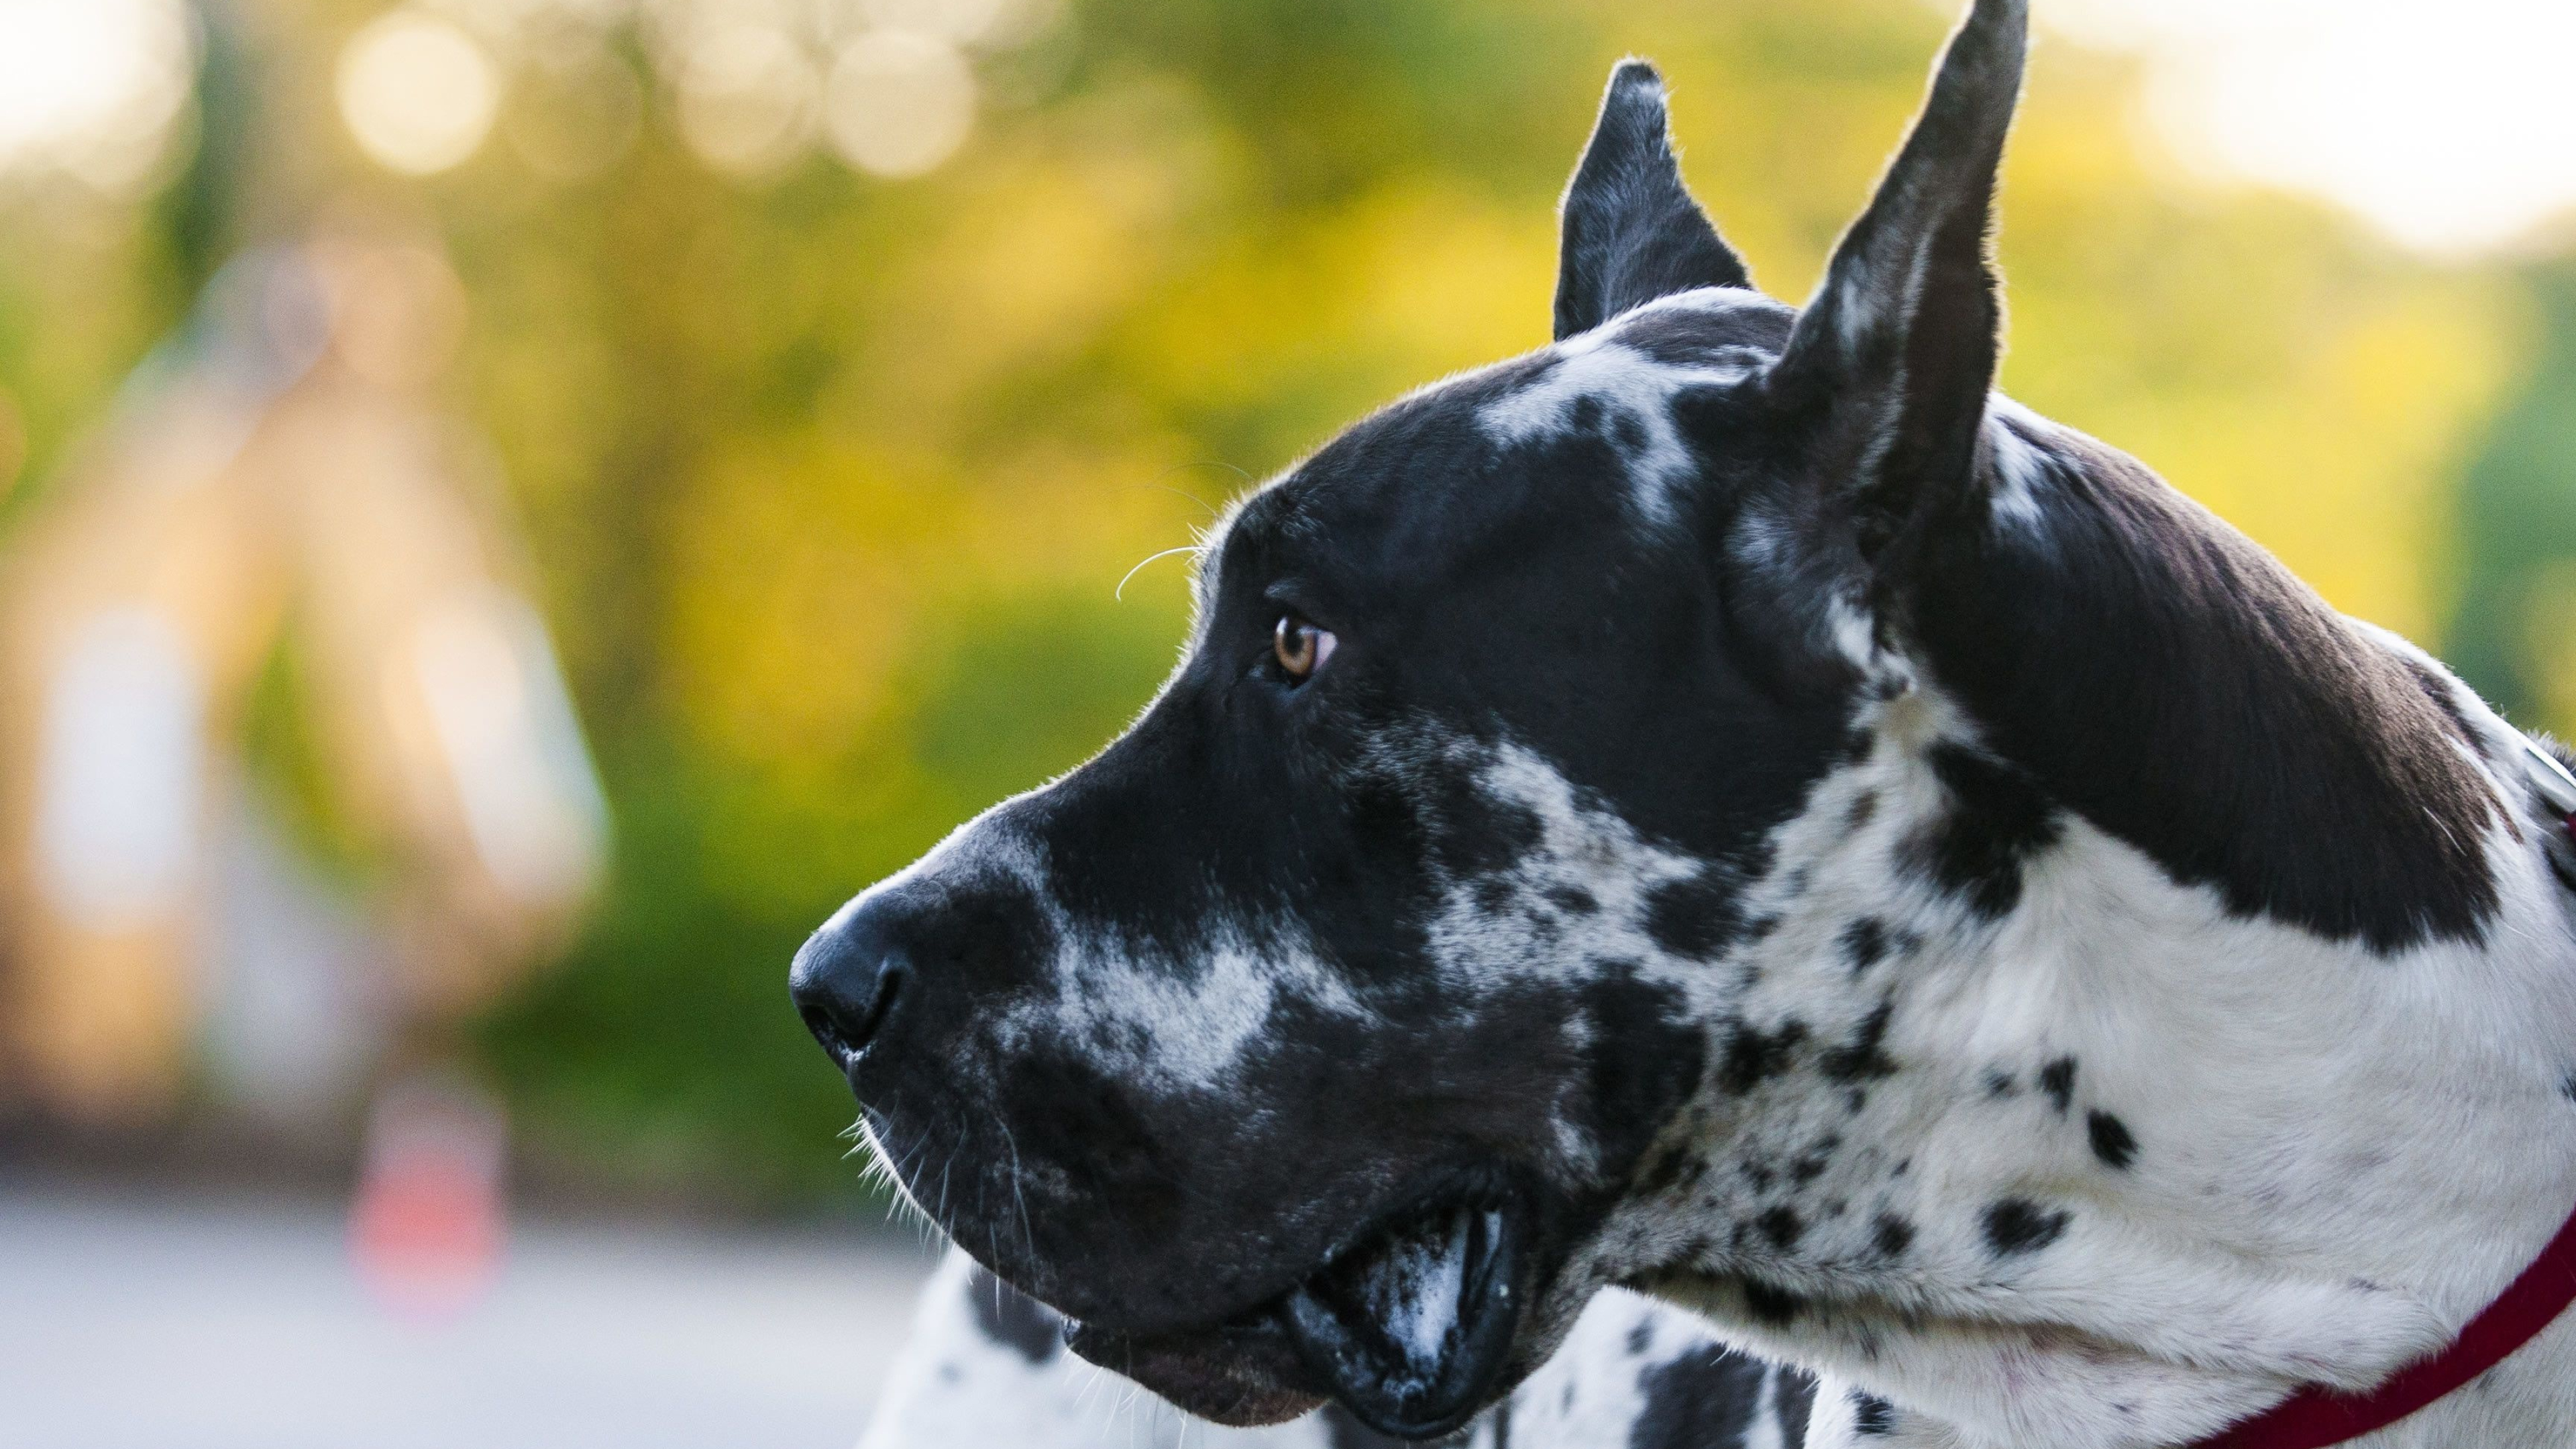 Great Dane: One of the largest breeds in the world, German Dogge, Mastiff-sighthound type. 3840x2160 4K Background.